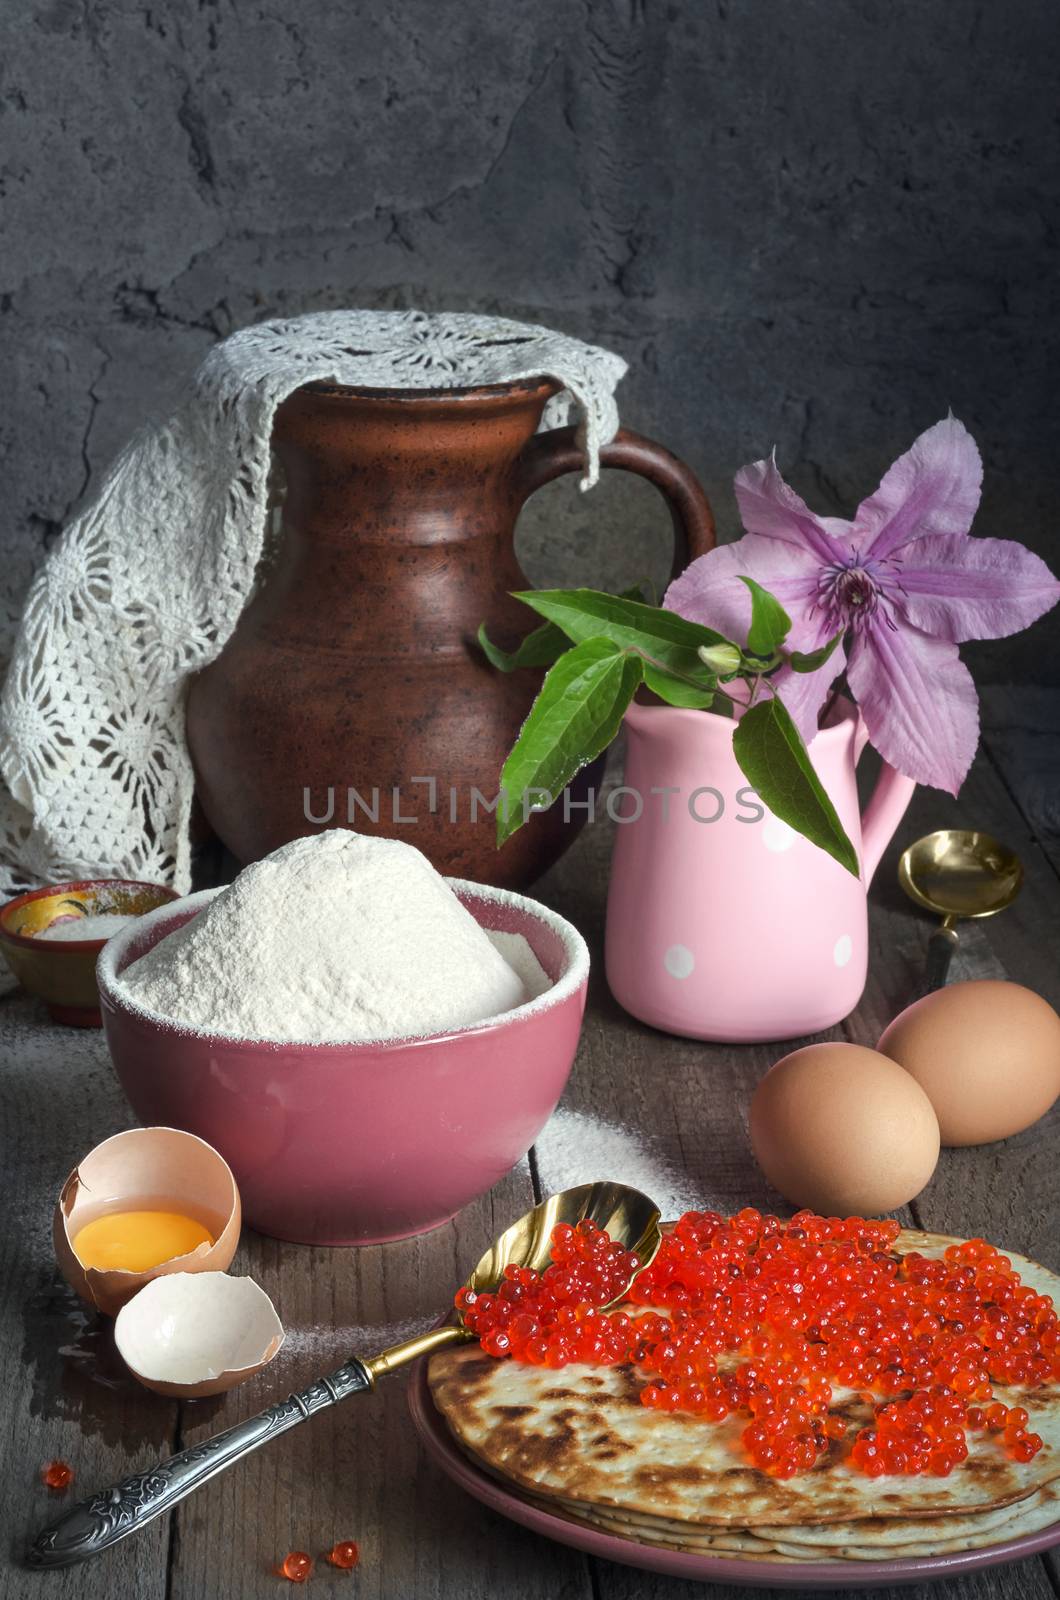 Pancakes with red caviar on a plate. Antique caviar spoon. In a bowl, flour, and eggs on a grey background and rough wooden surface. A pitcher and a vase with flowers in the background.